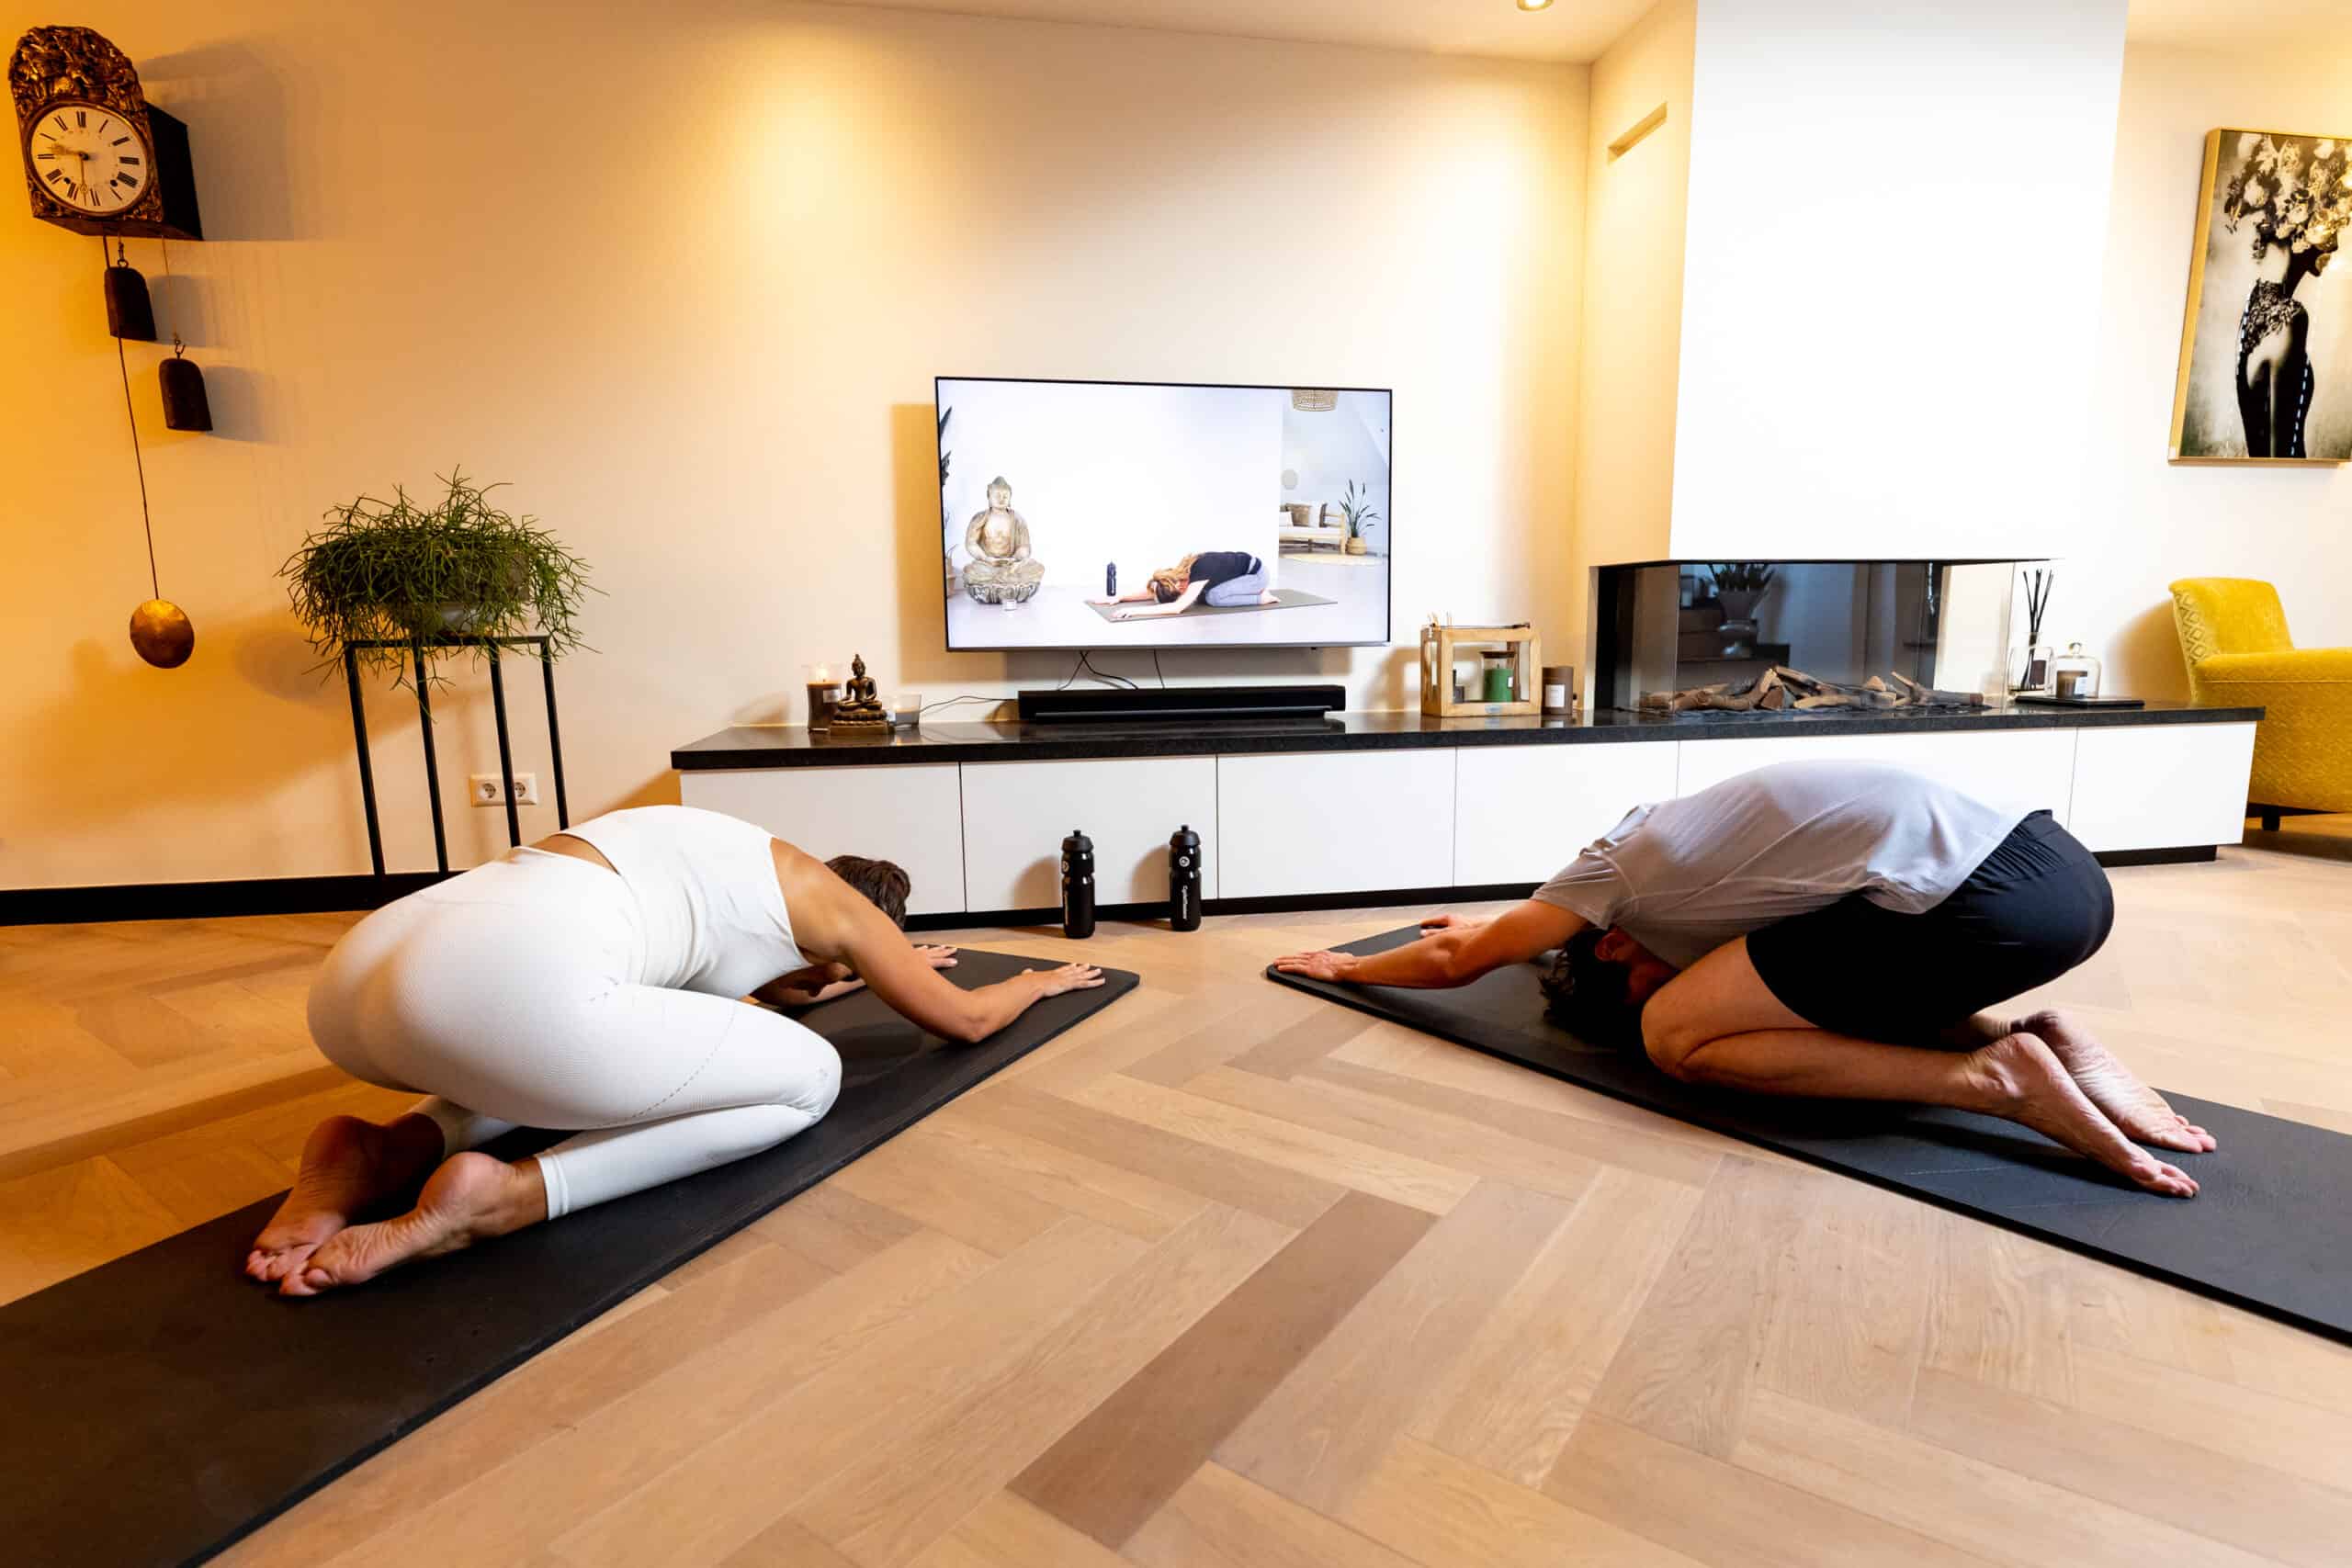 Yoga and Indoor cycling: an excellent combination